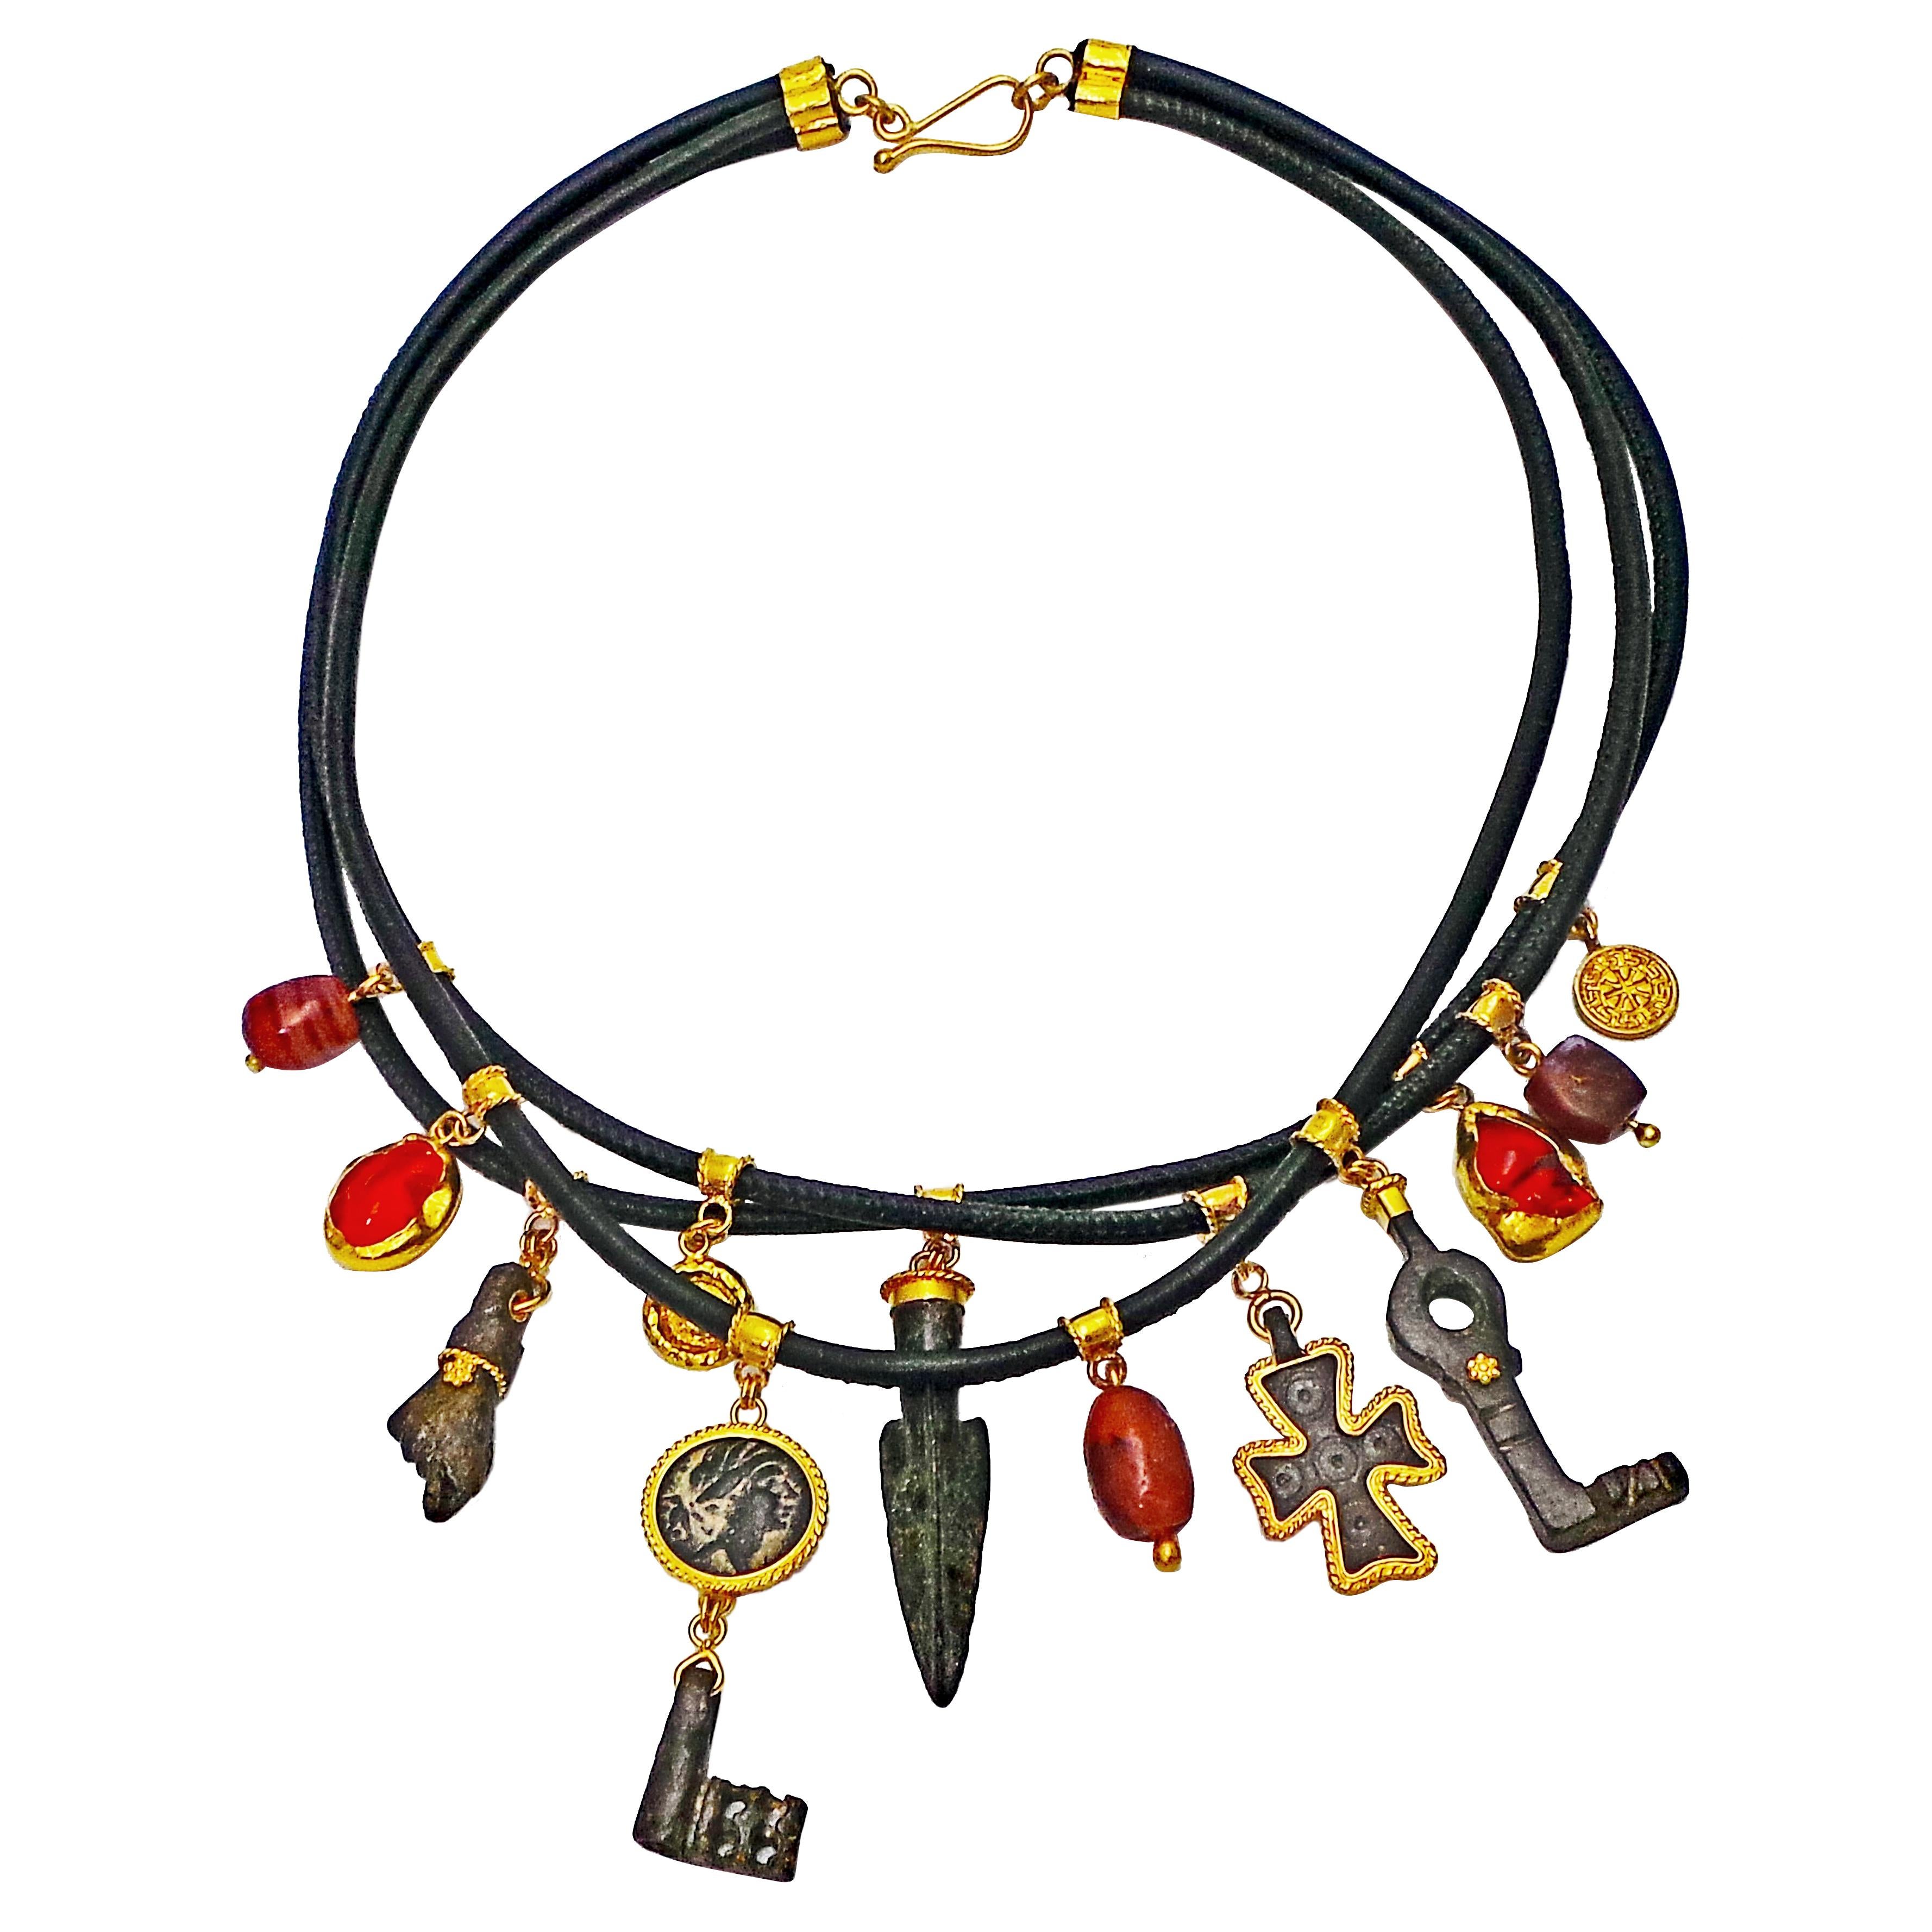 Bohemian 3-Strand Leather Necklace with Ancient Coin, Artifacts, and Fire Opals 